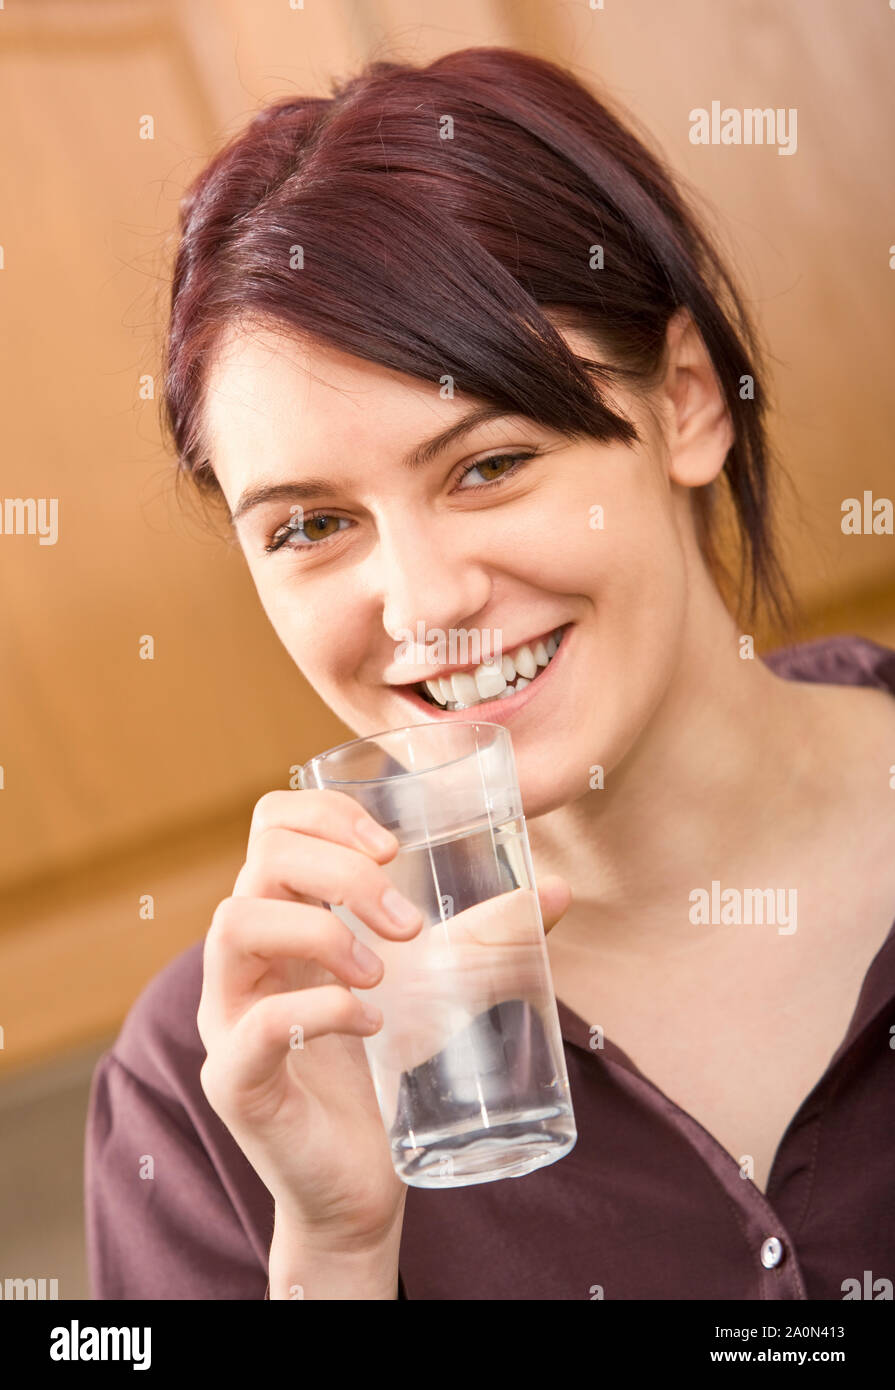 Young woman drinking a glass of water Stock Photo